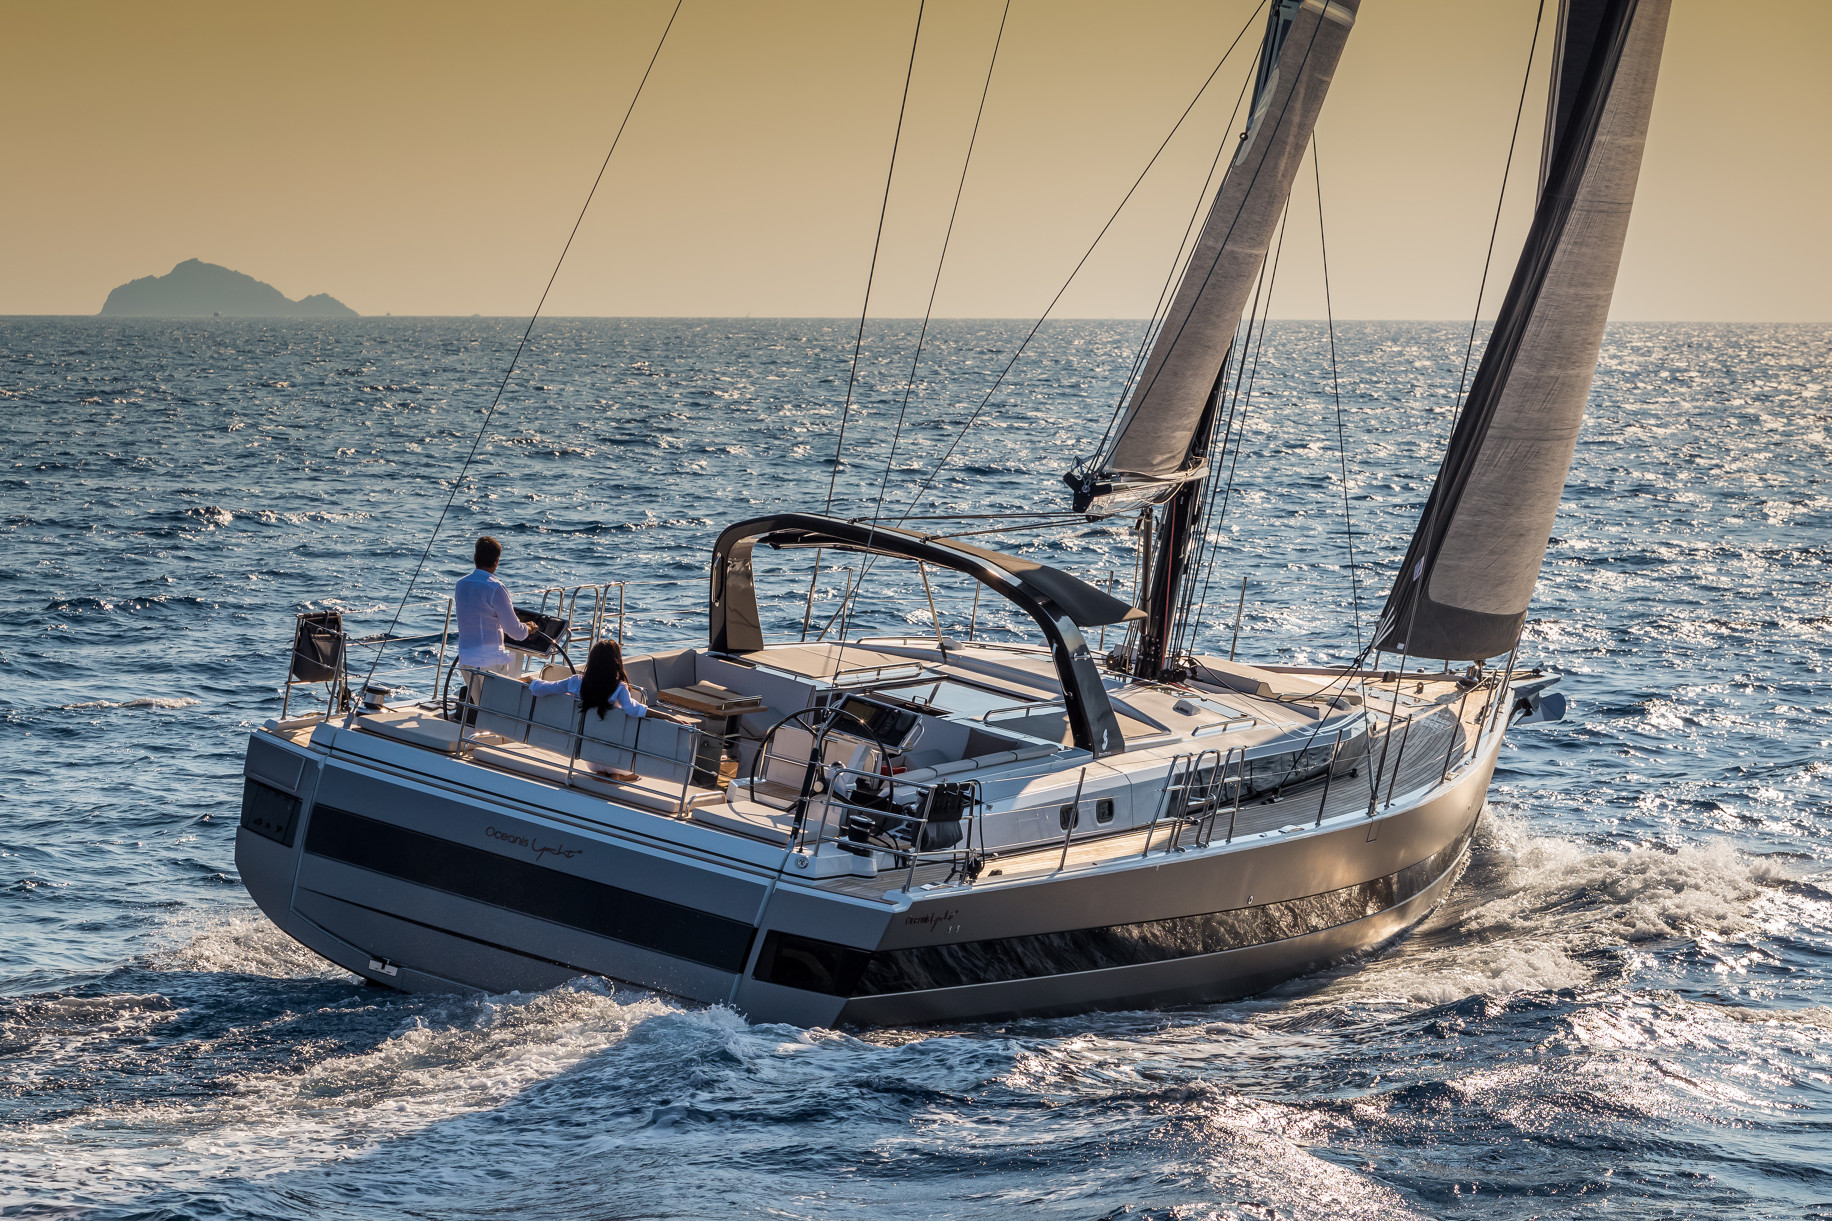 Isle Porquerolles, France, 28 september 2016.The all new Oceanis Yacht 62 By Beneteau.Ph: Guido Cantini / Sea&See